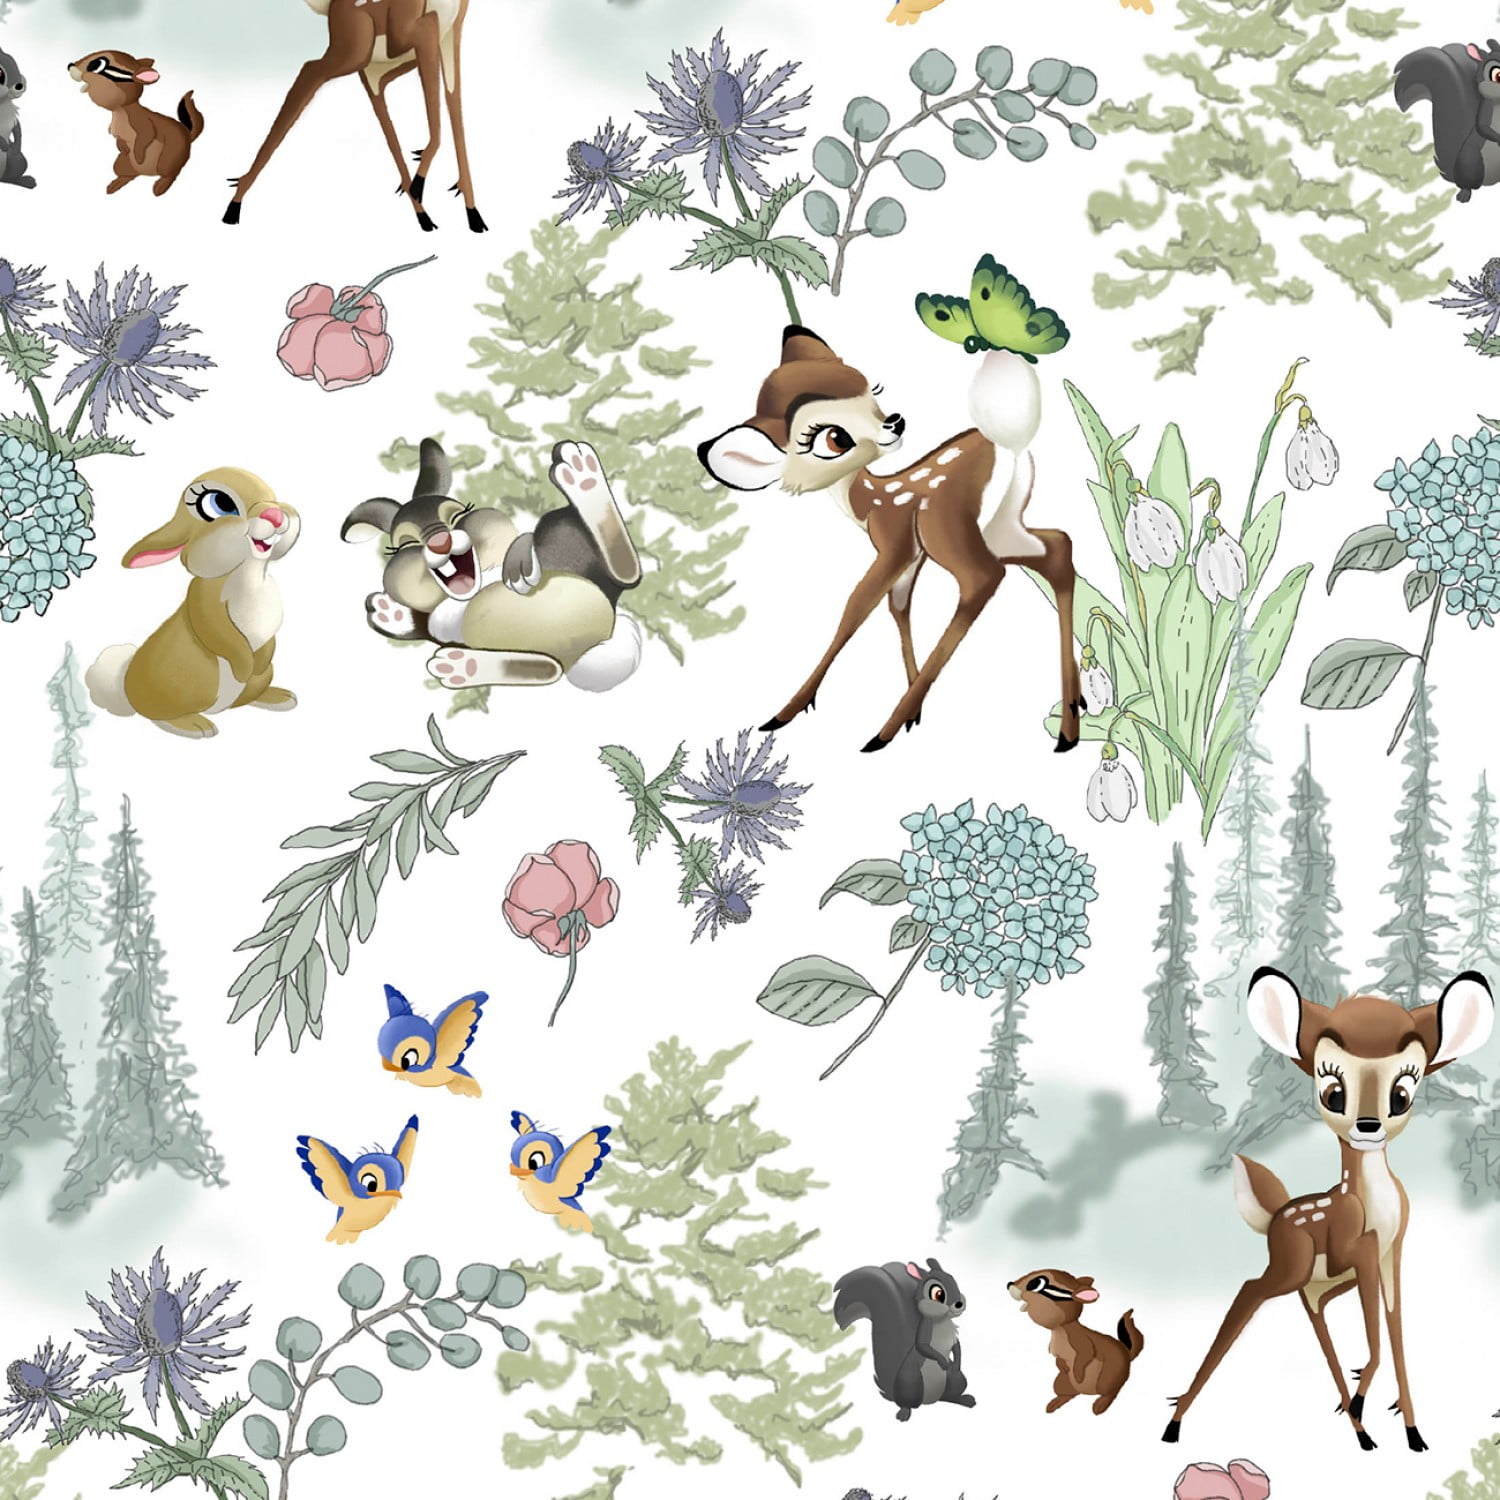 Sweet Bambi 100% cotton fabric by the yard Springs Creative Bambi Disney cotton Fabric beige blue white Swaddling blanket fabric